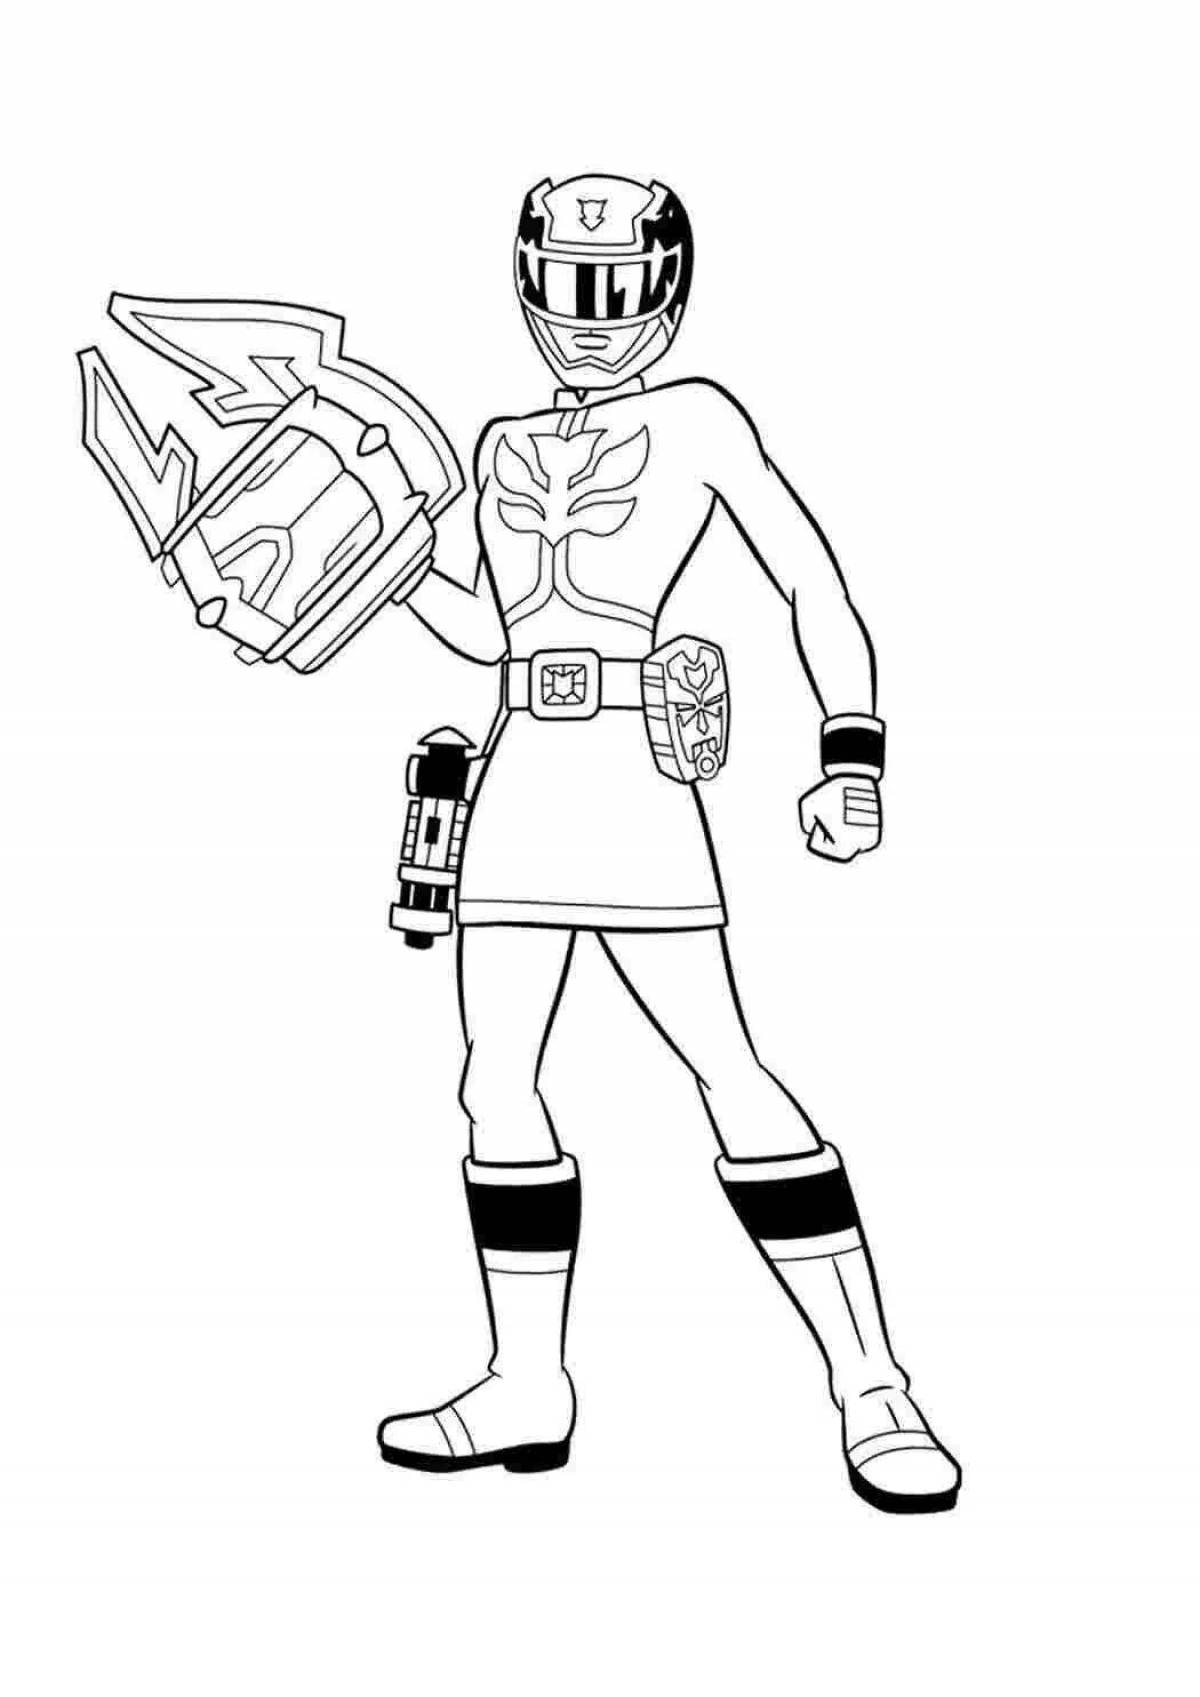 Glorious Power Rangers coloring page